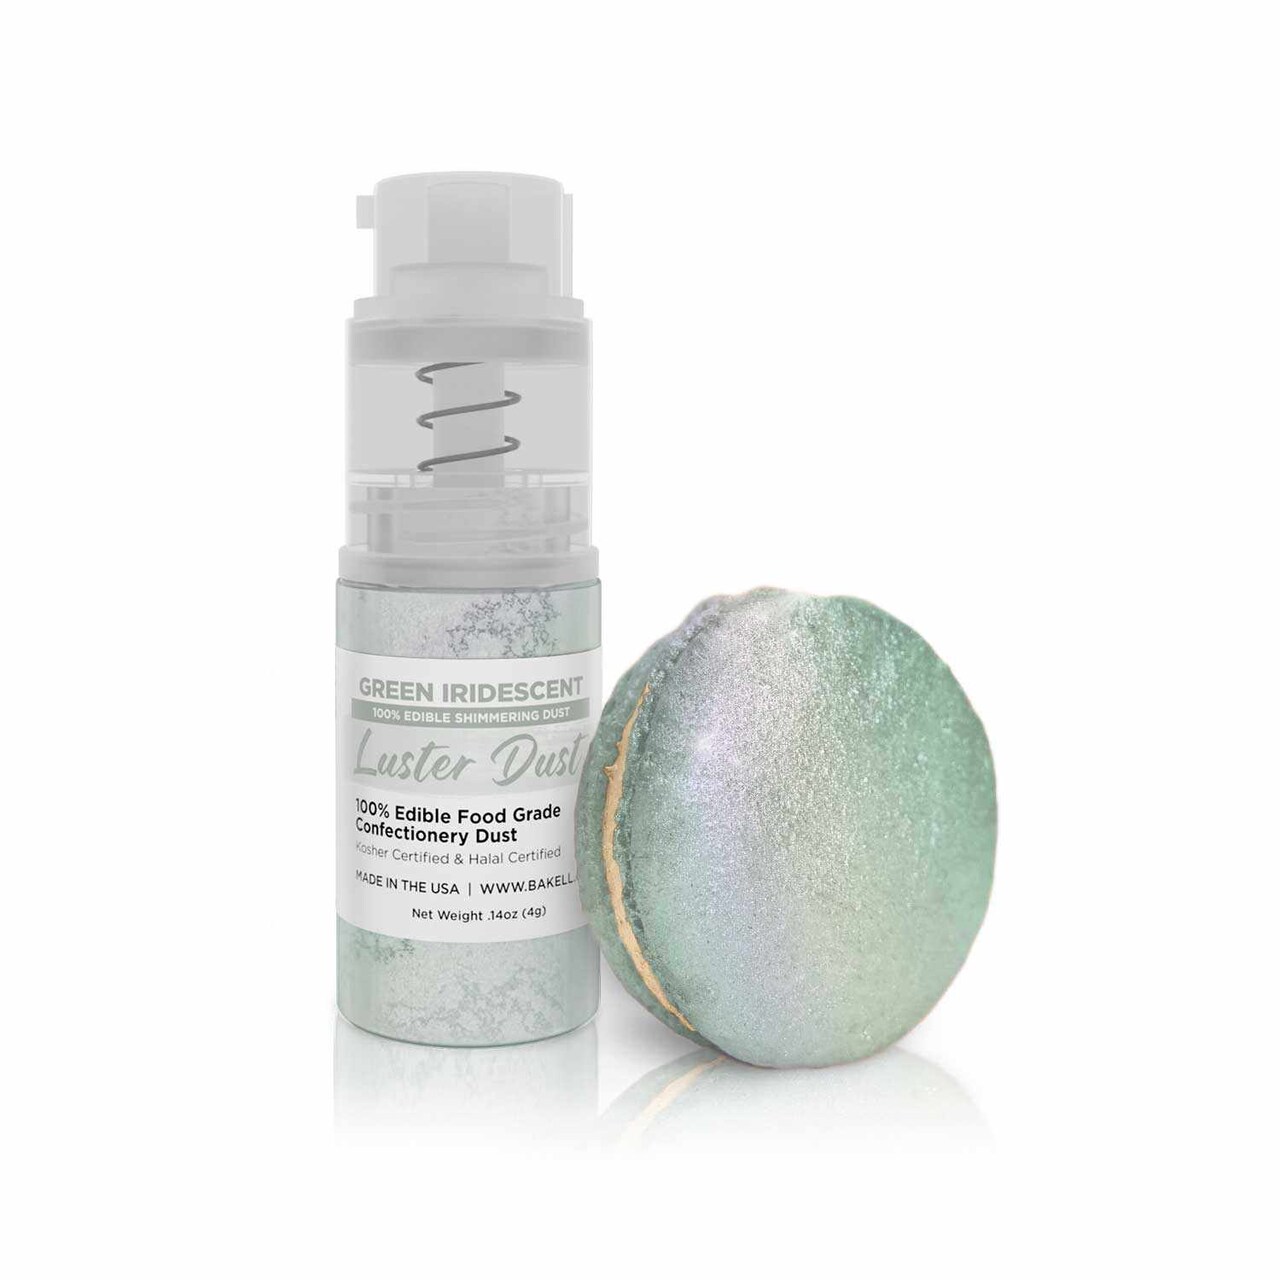 Green Iridescent Luster Dust Spray, Luster Dust Edible Glitter Spray Dust  for Cakes, Cookies, Desserts, Paint. FDA Compliant (4 Gram Pump)